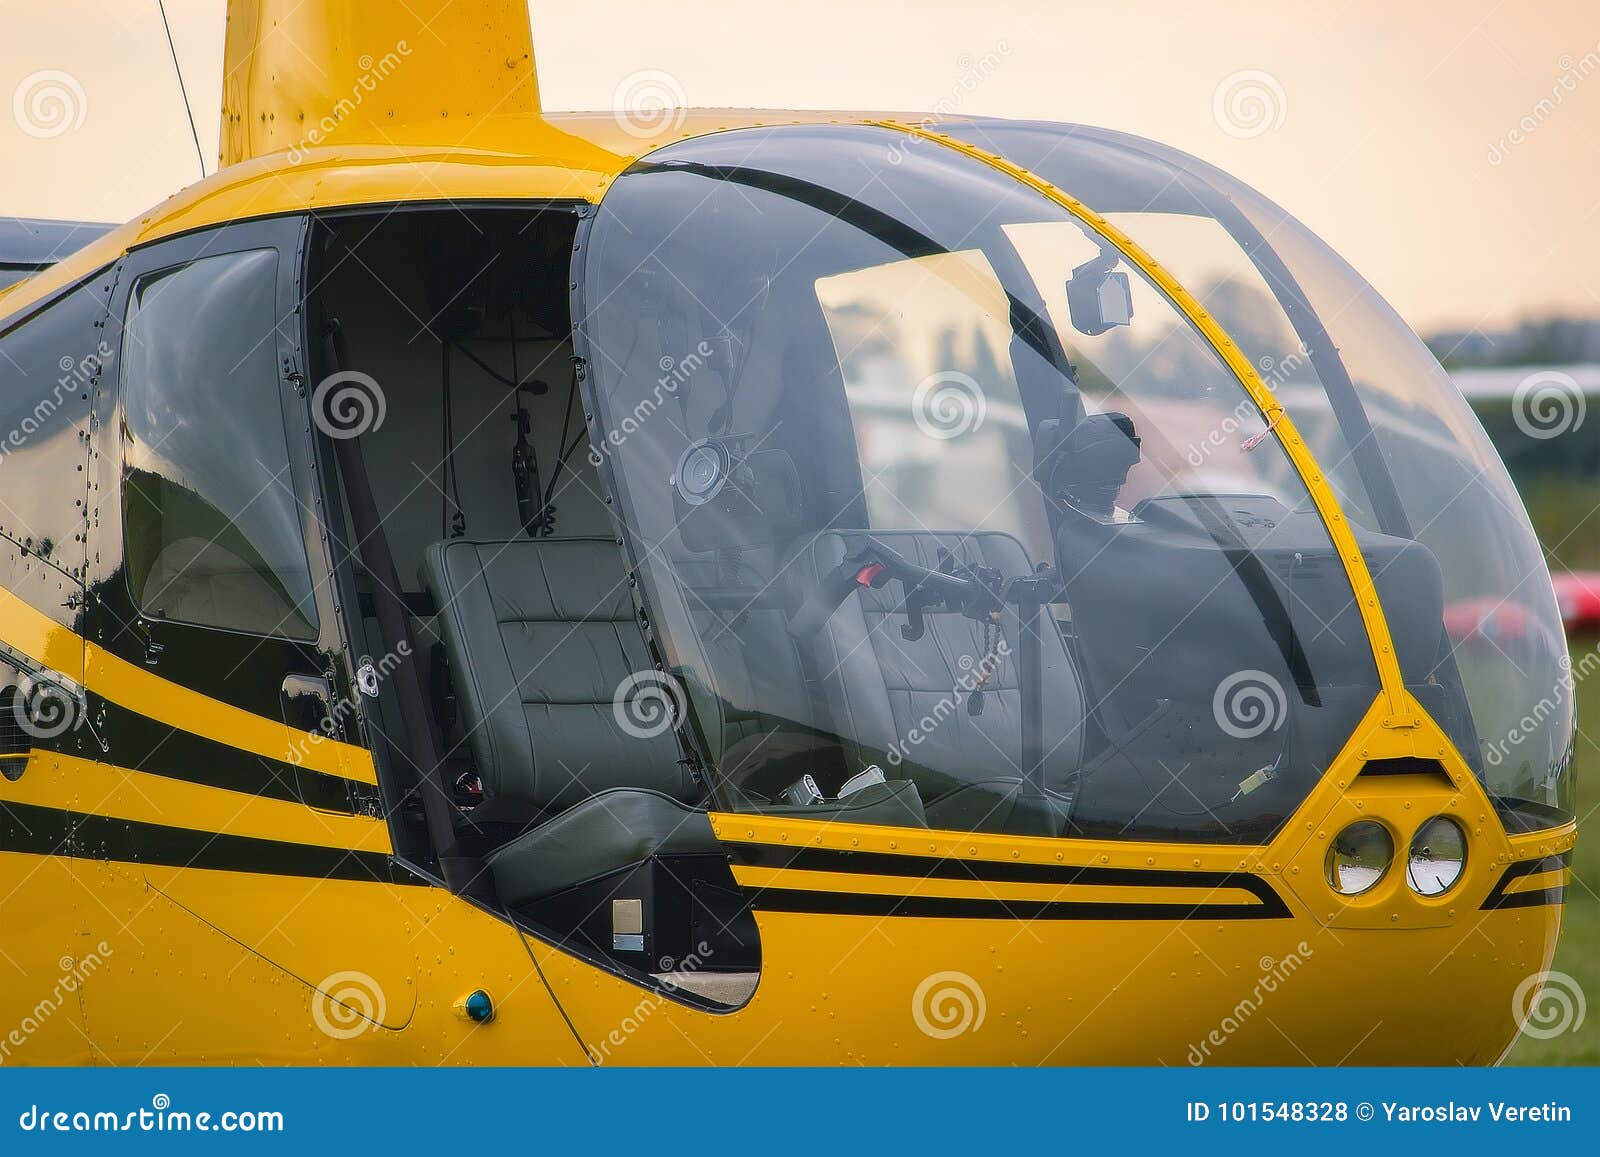 yellow vintage helicopter on stage. close up